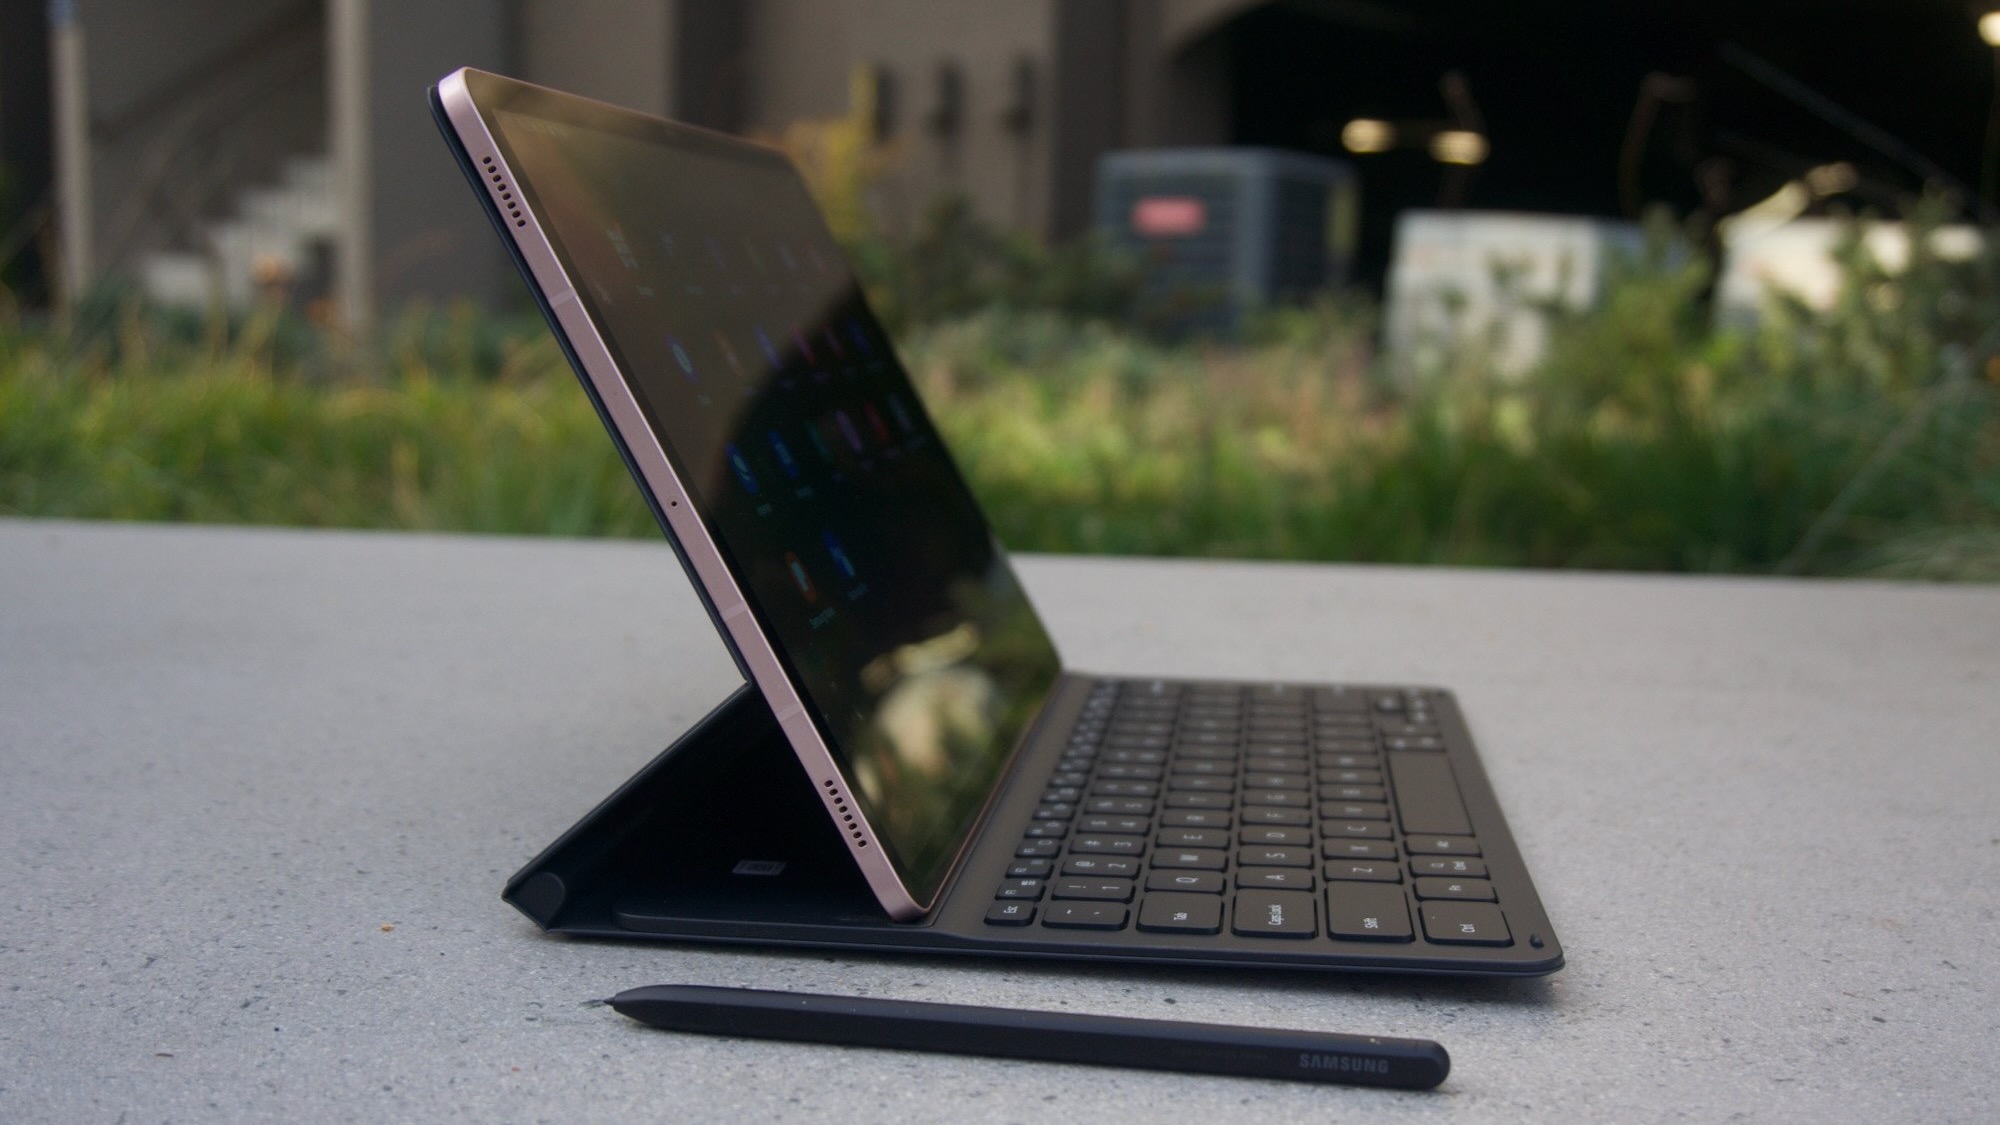 The Galaxy Tab S8 Plus with keyboard and S Pen